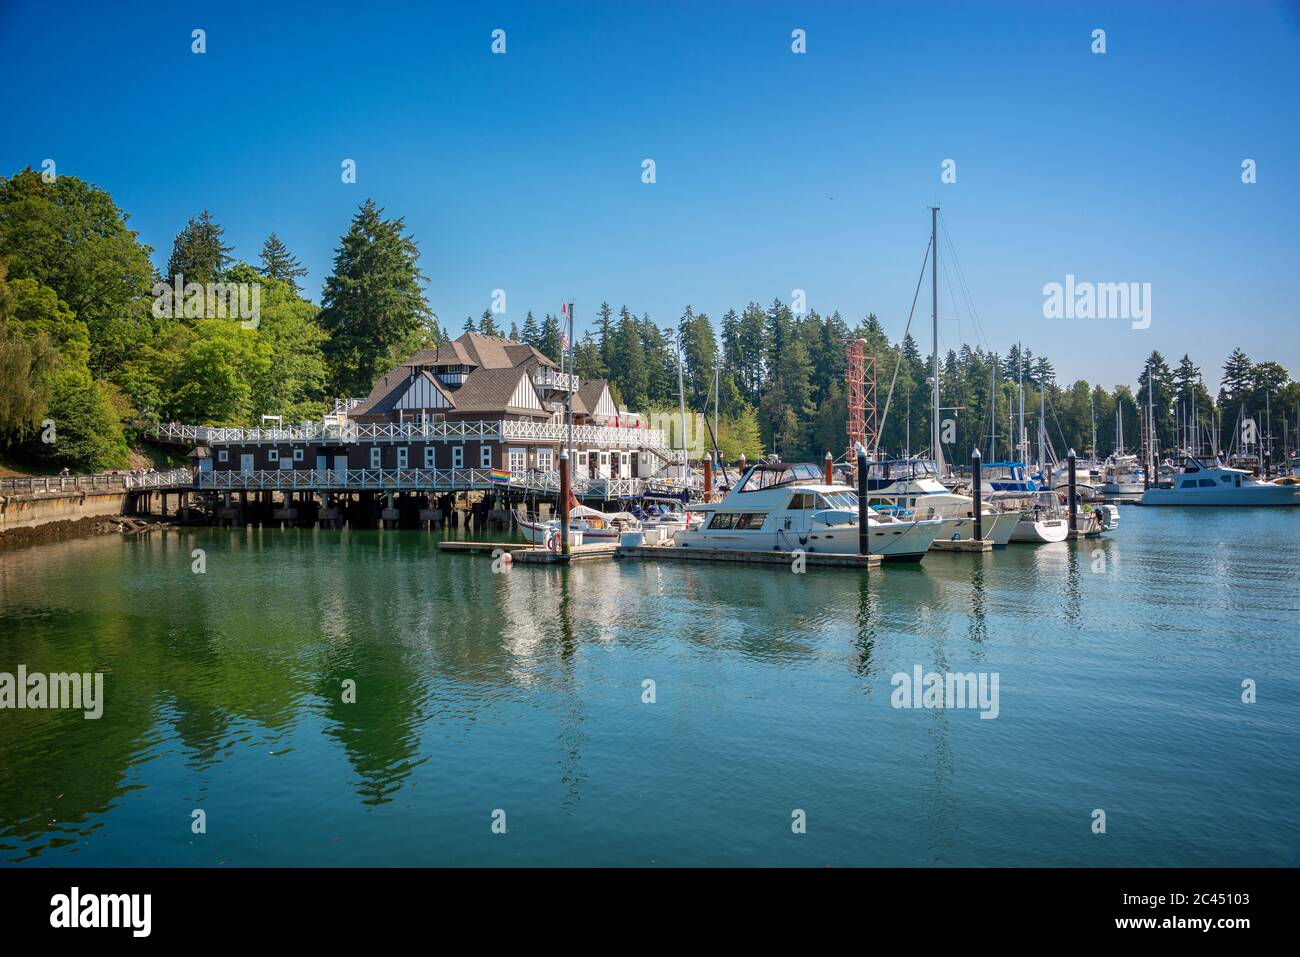 Sailboats in the marina of the rowing club in Stanley park, Vancouver, British Columbia, Canada Stock Photo